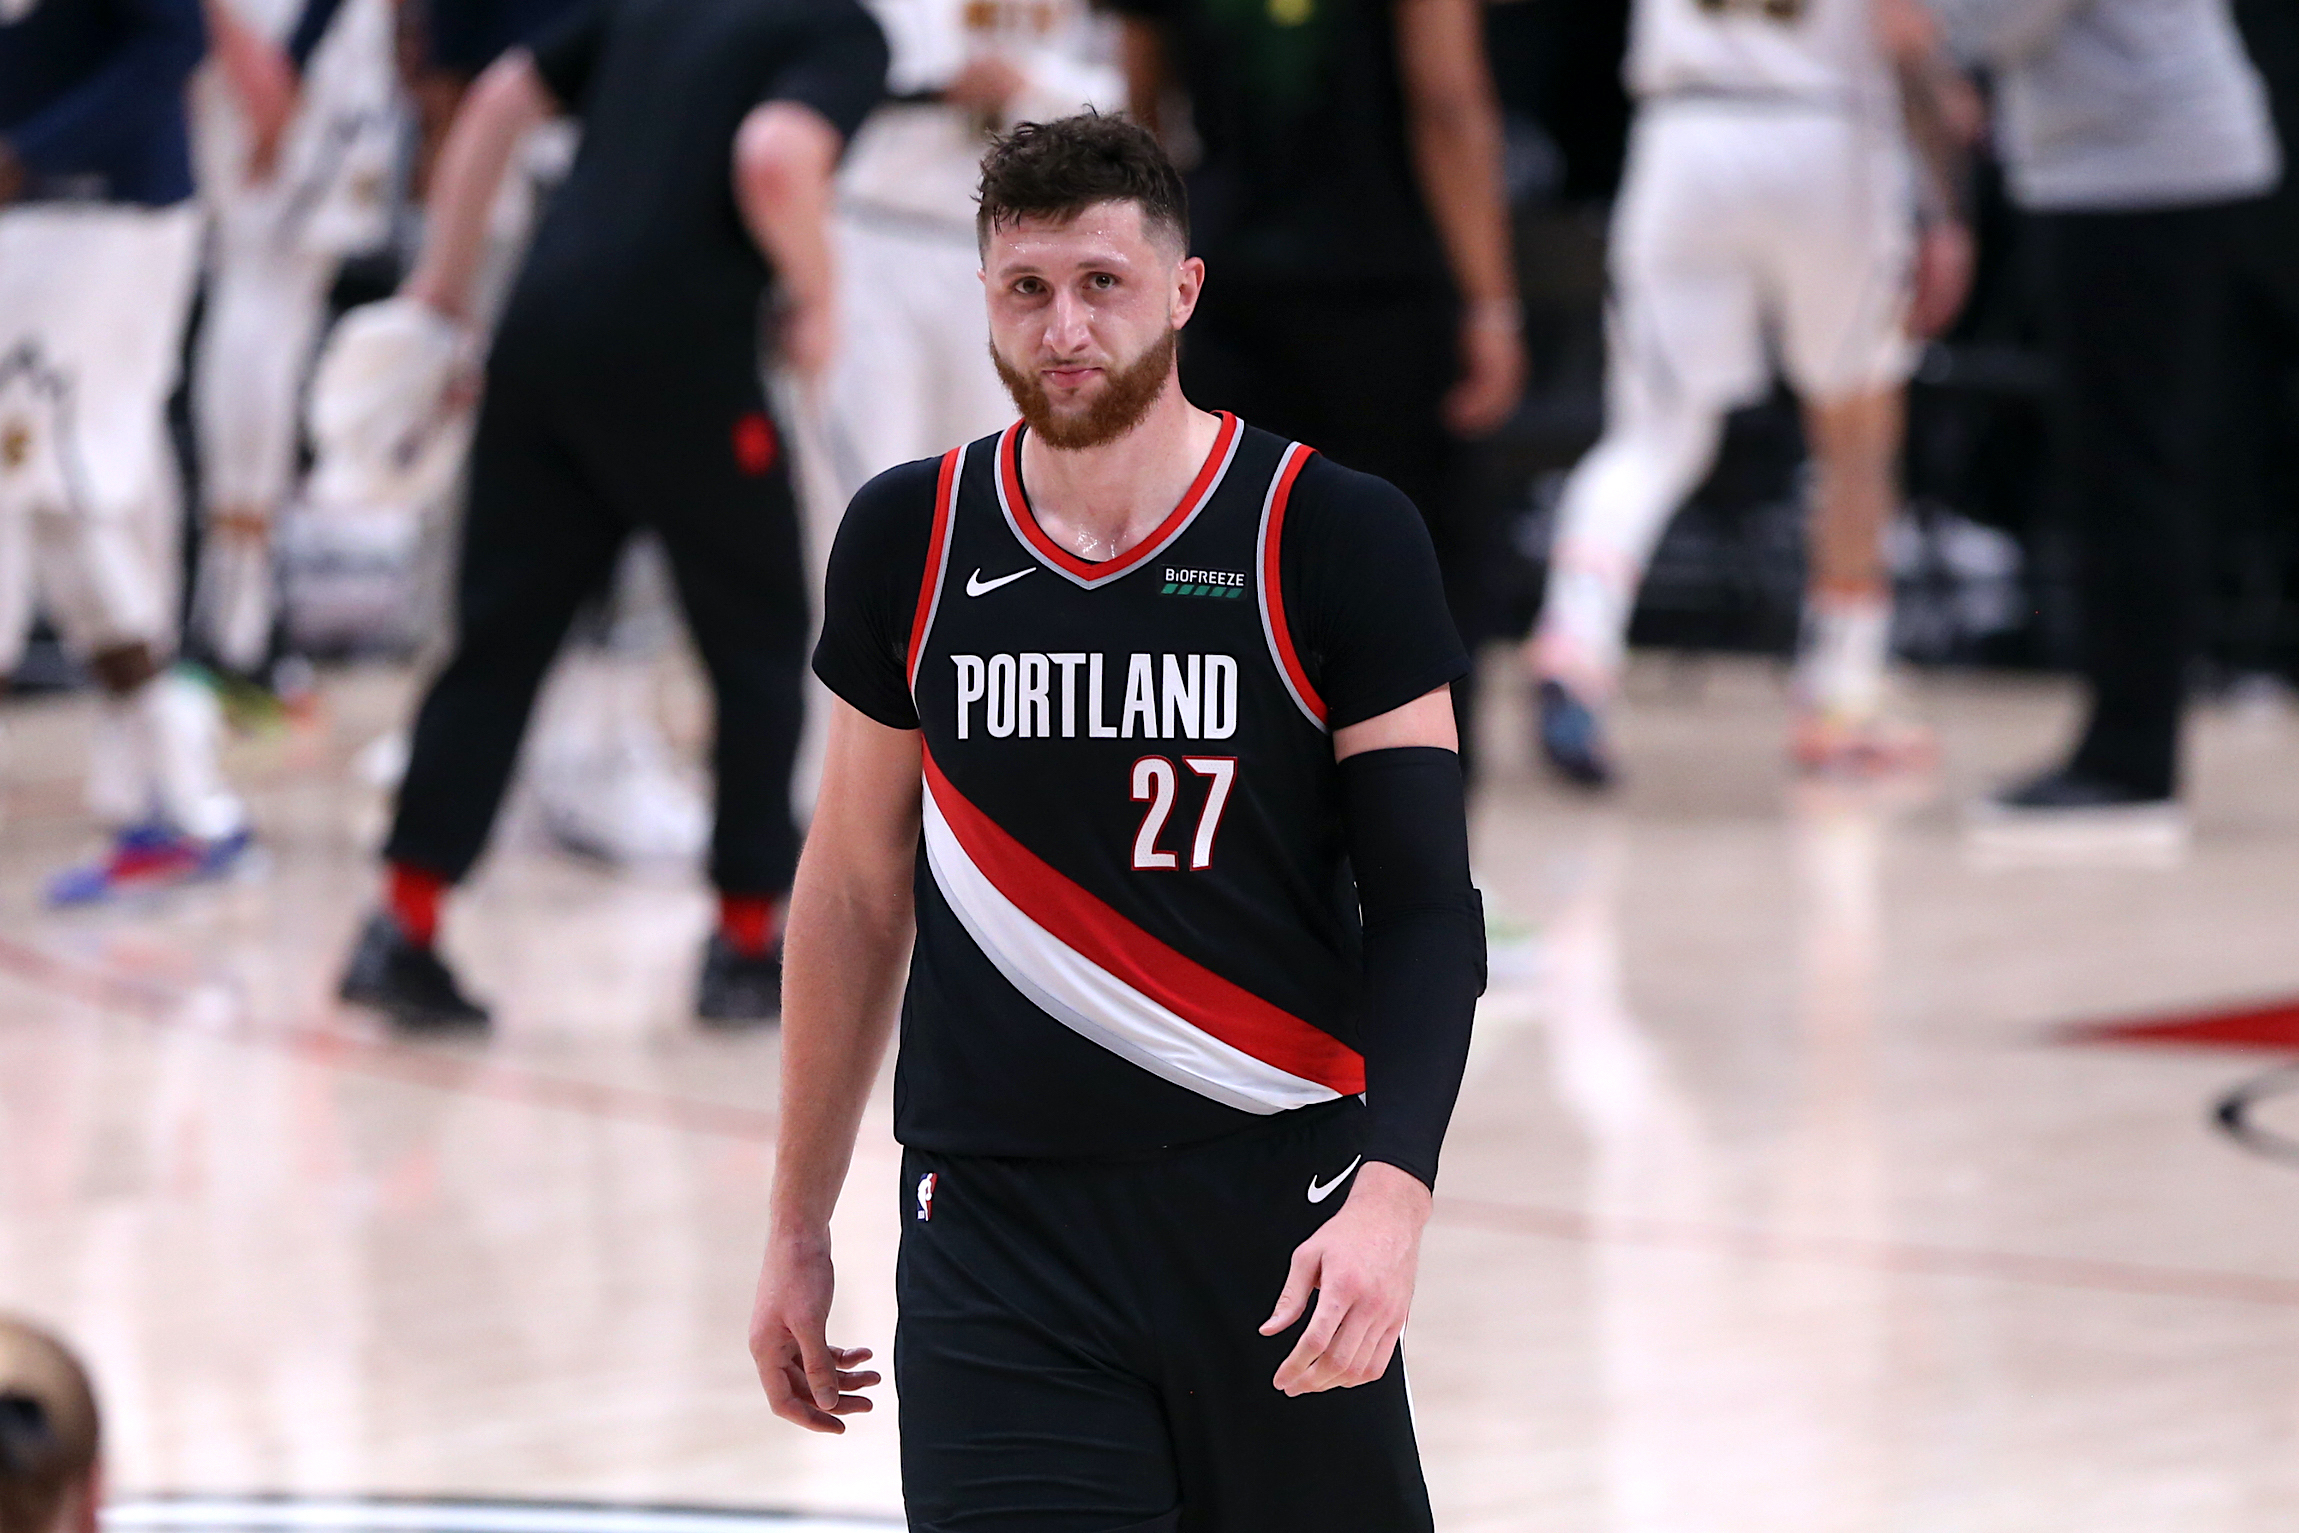 REPORT: The Denver Nuggets get good news on Jusuf Nurkic - Mile